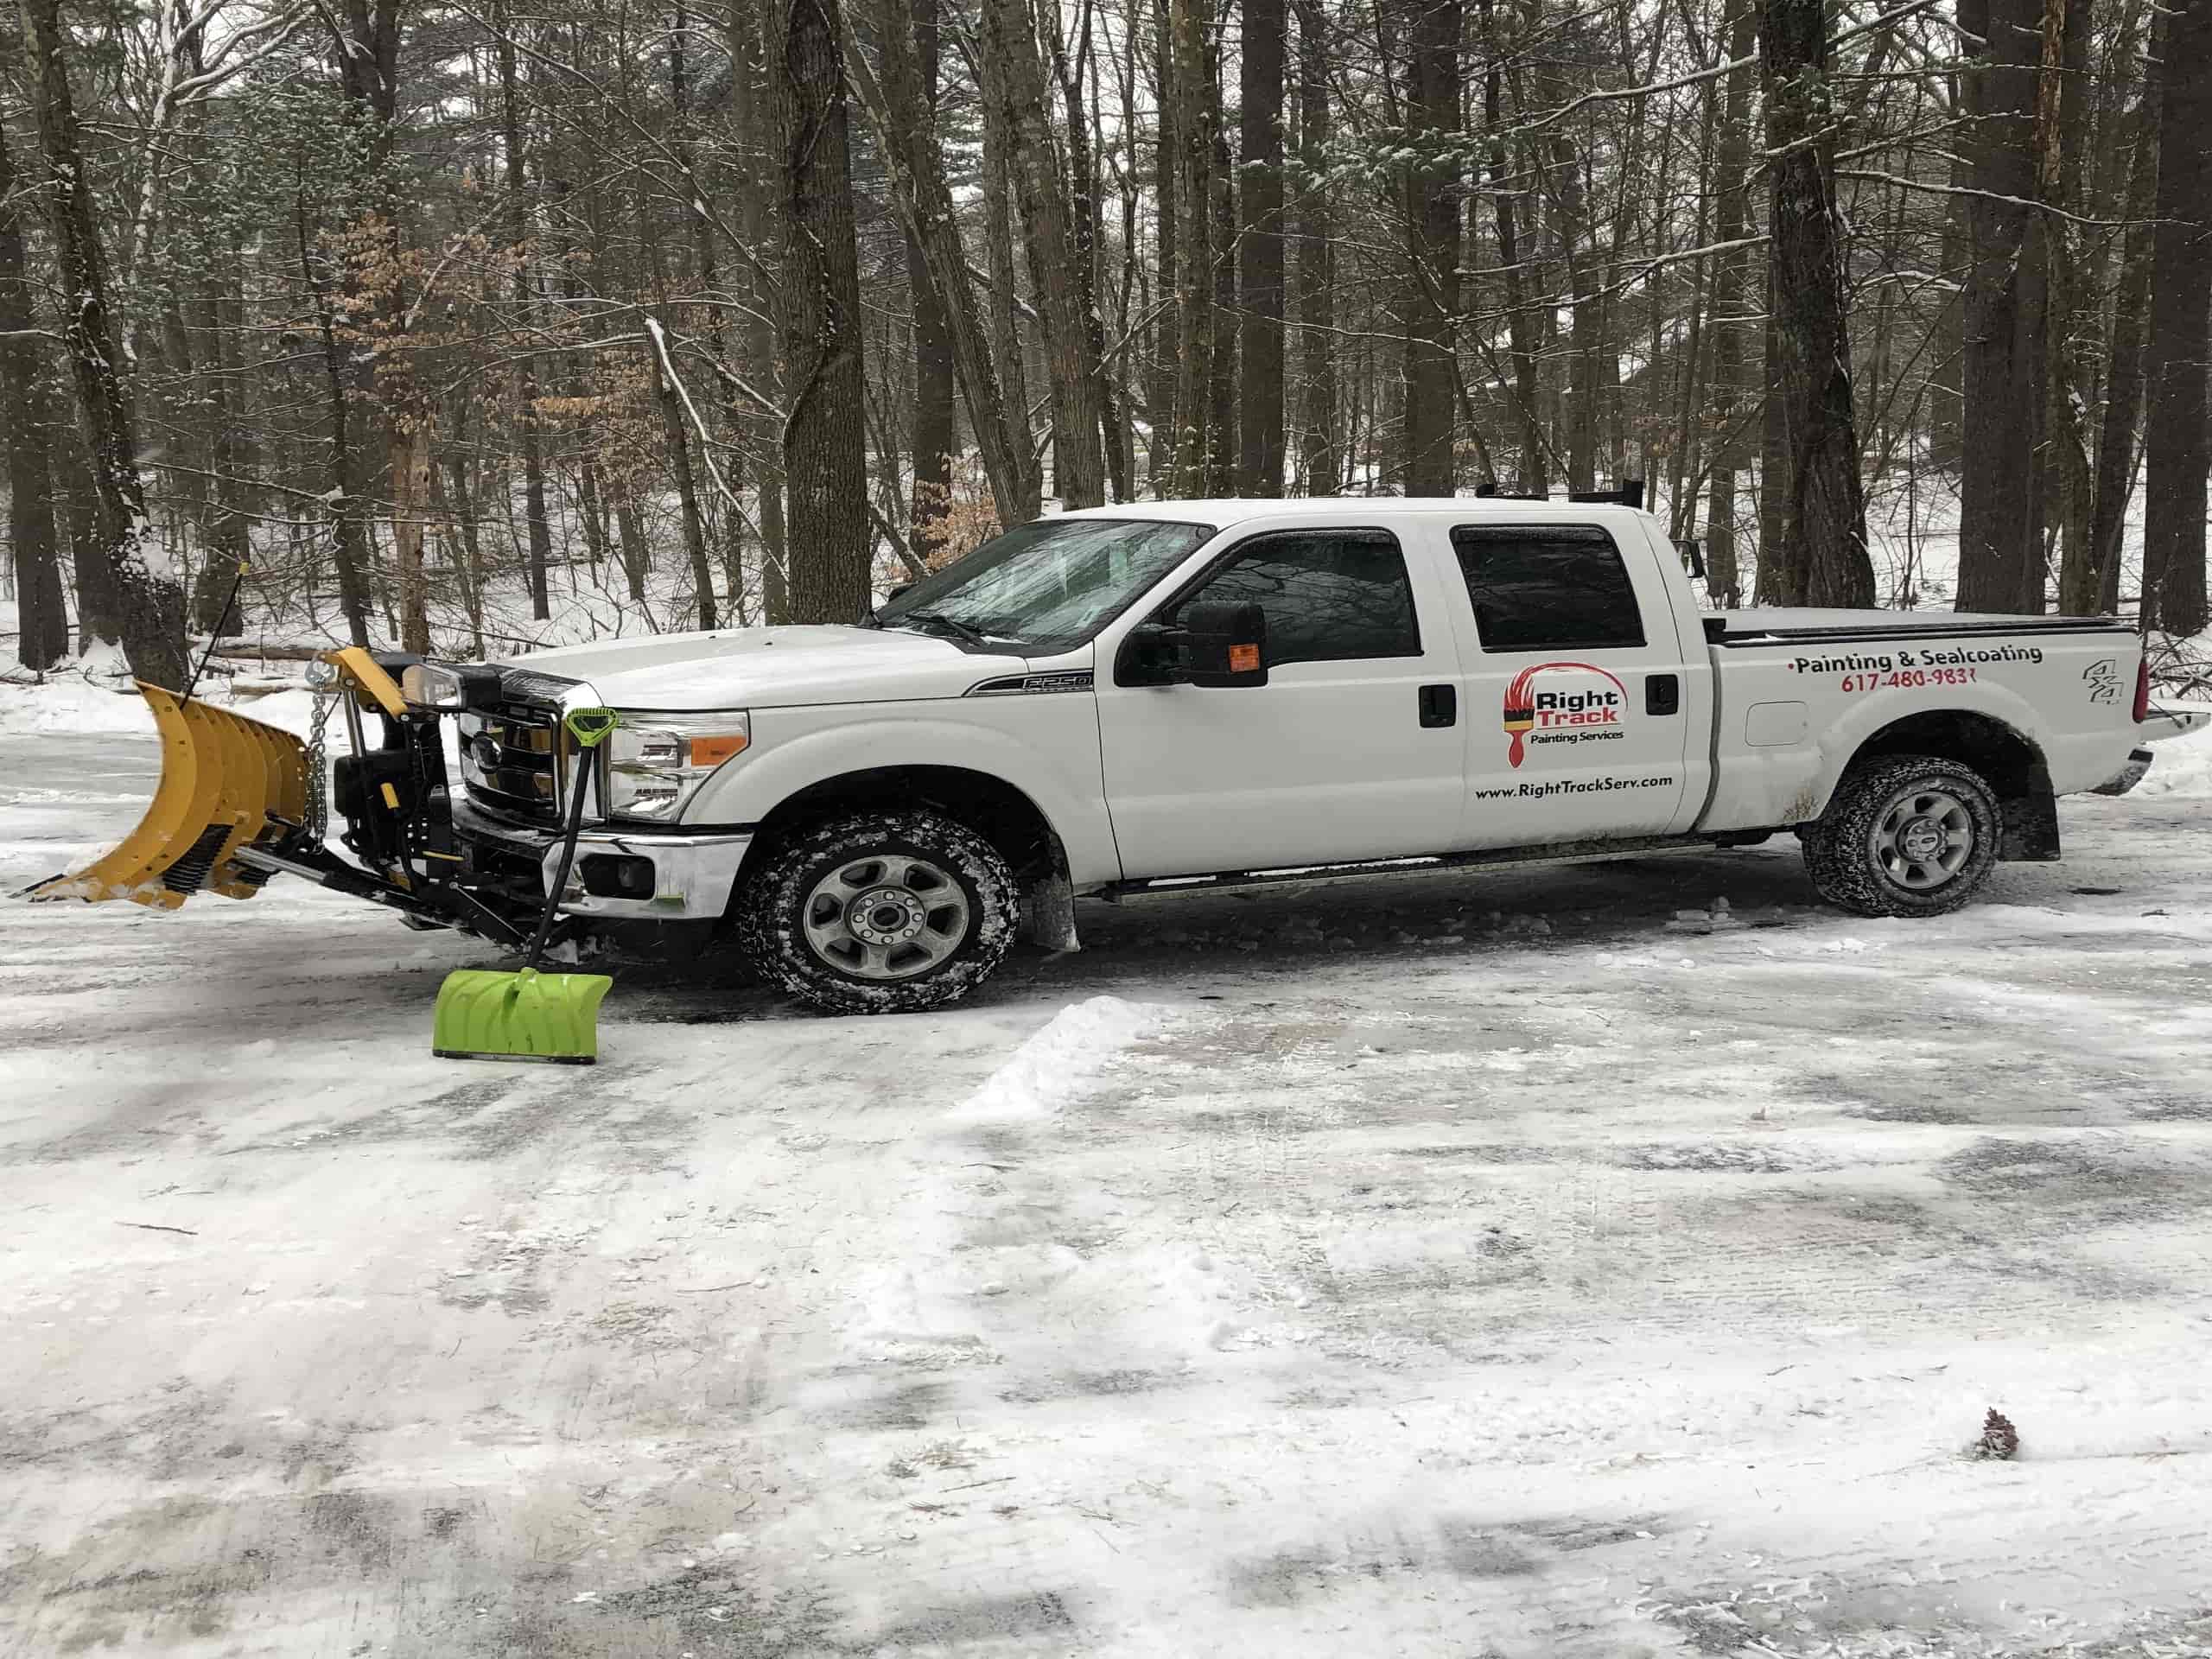 5 Reasons to consider hiring a Snow Removal Service